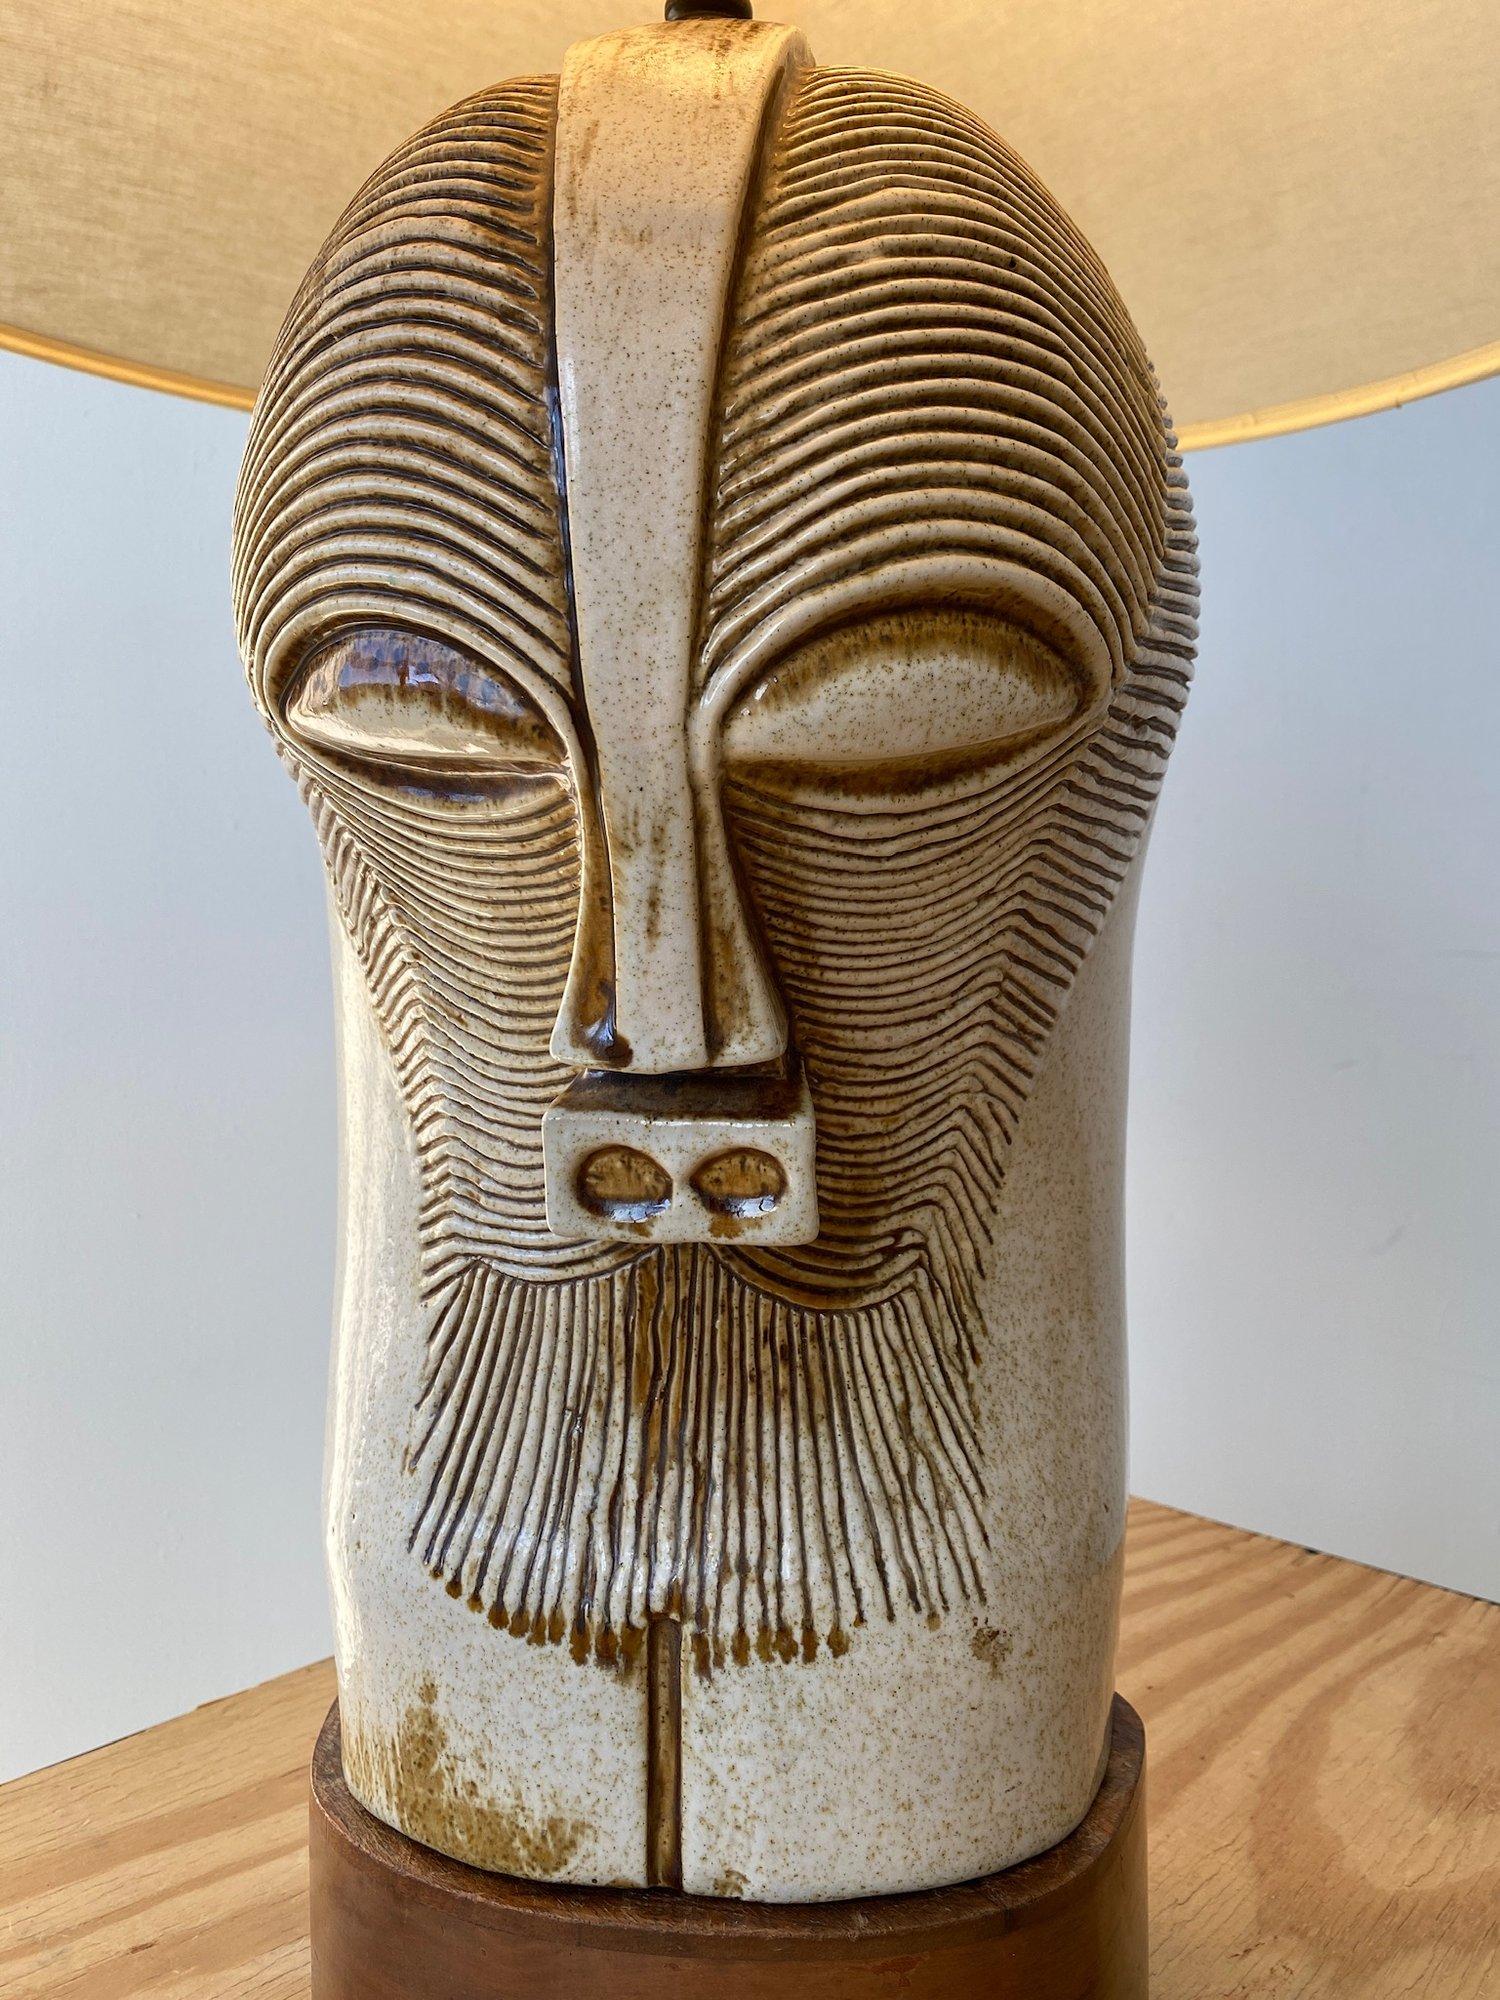 American Vintage Large Scale Ceramic Kifwebe-Inspired Mask Lamp on Mahogany Base, 1950s For Sale